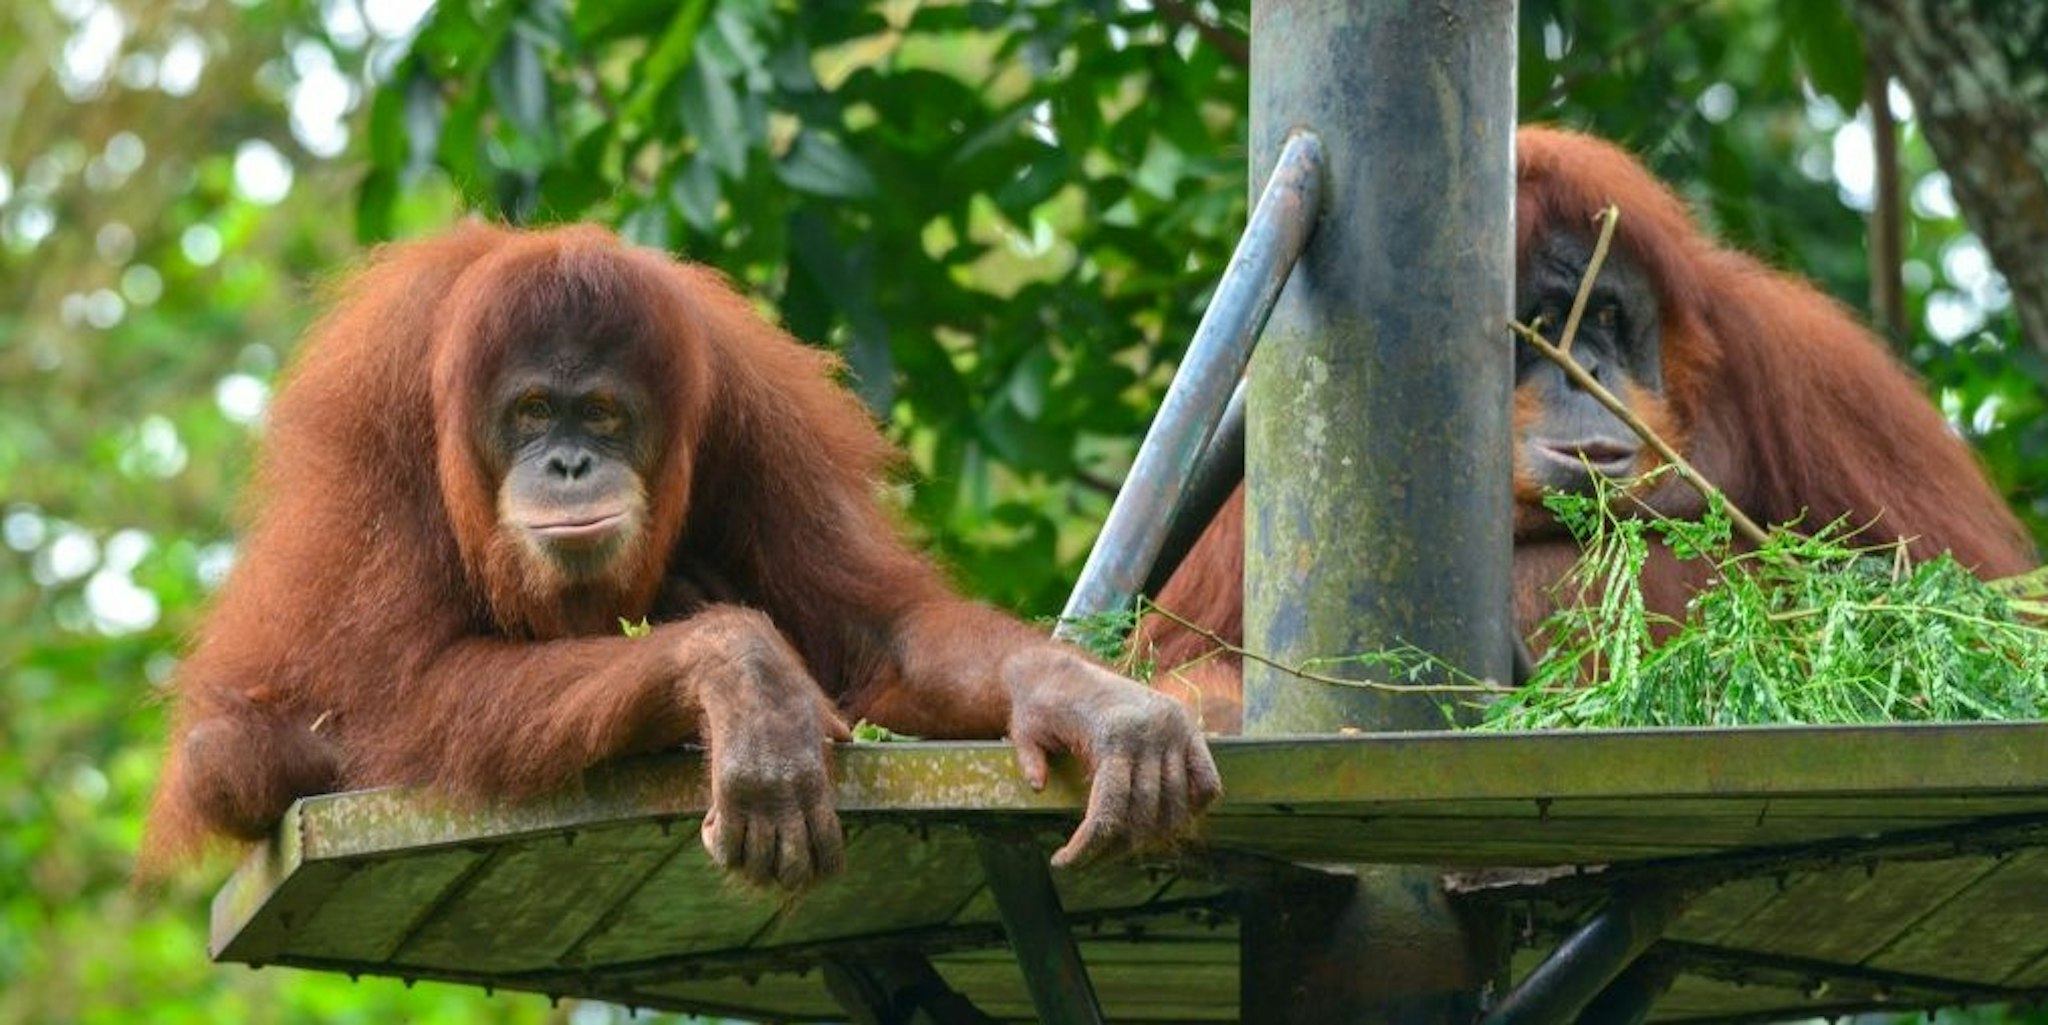 KUALA LUMPUR, Dec. 19, 2020 -- Sumatran orangutans are seen at Zoo Negara near Kuala Lumpur, Malaysia, Dec. 19, 2020. Zoo Negara reopened to the public on Dec. 18 after two months' closure forced by the conditional movement control order CMCO in the area. Based upon current assessments, the Zoo will remain open as scheduled with reduced capacity of 1,250 visitors. (Photo by